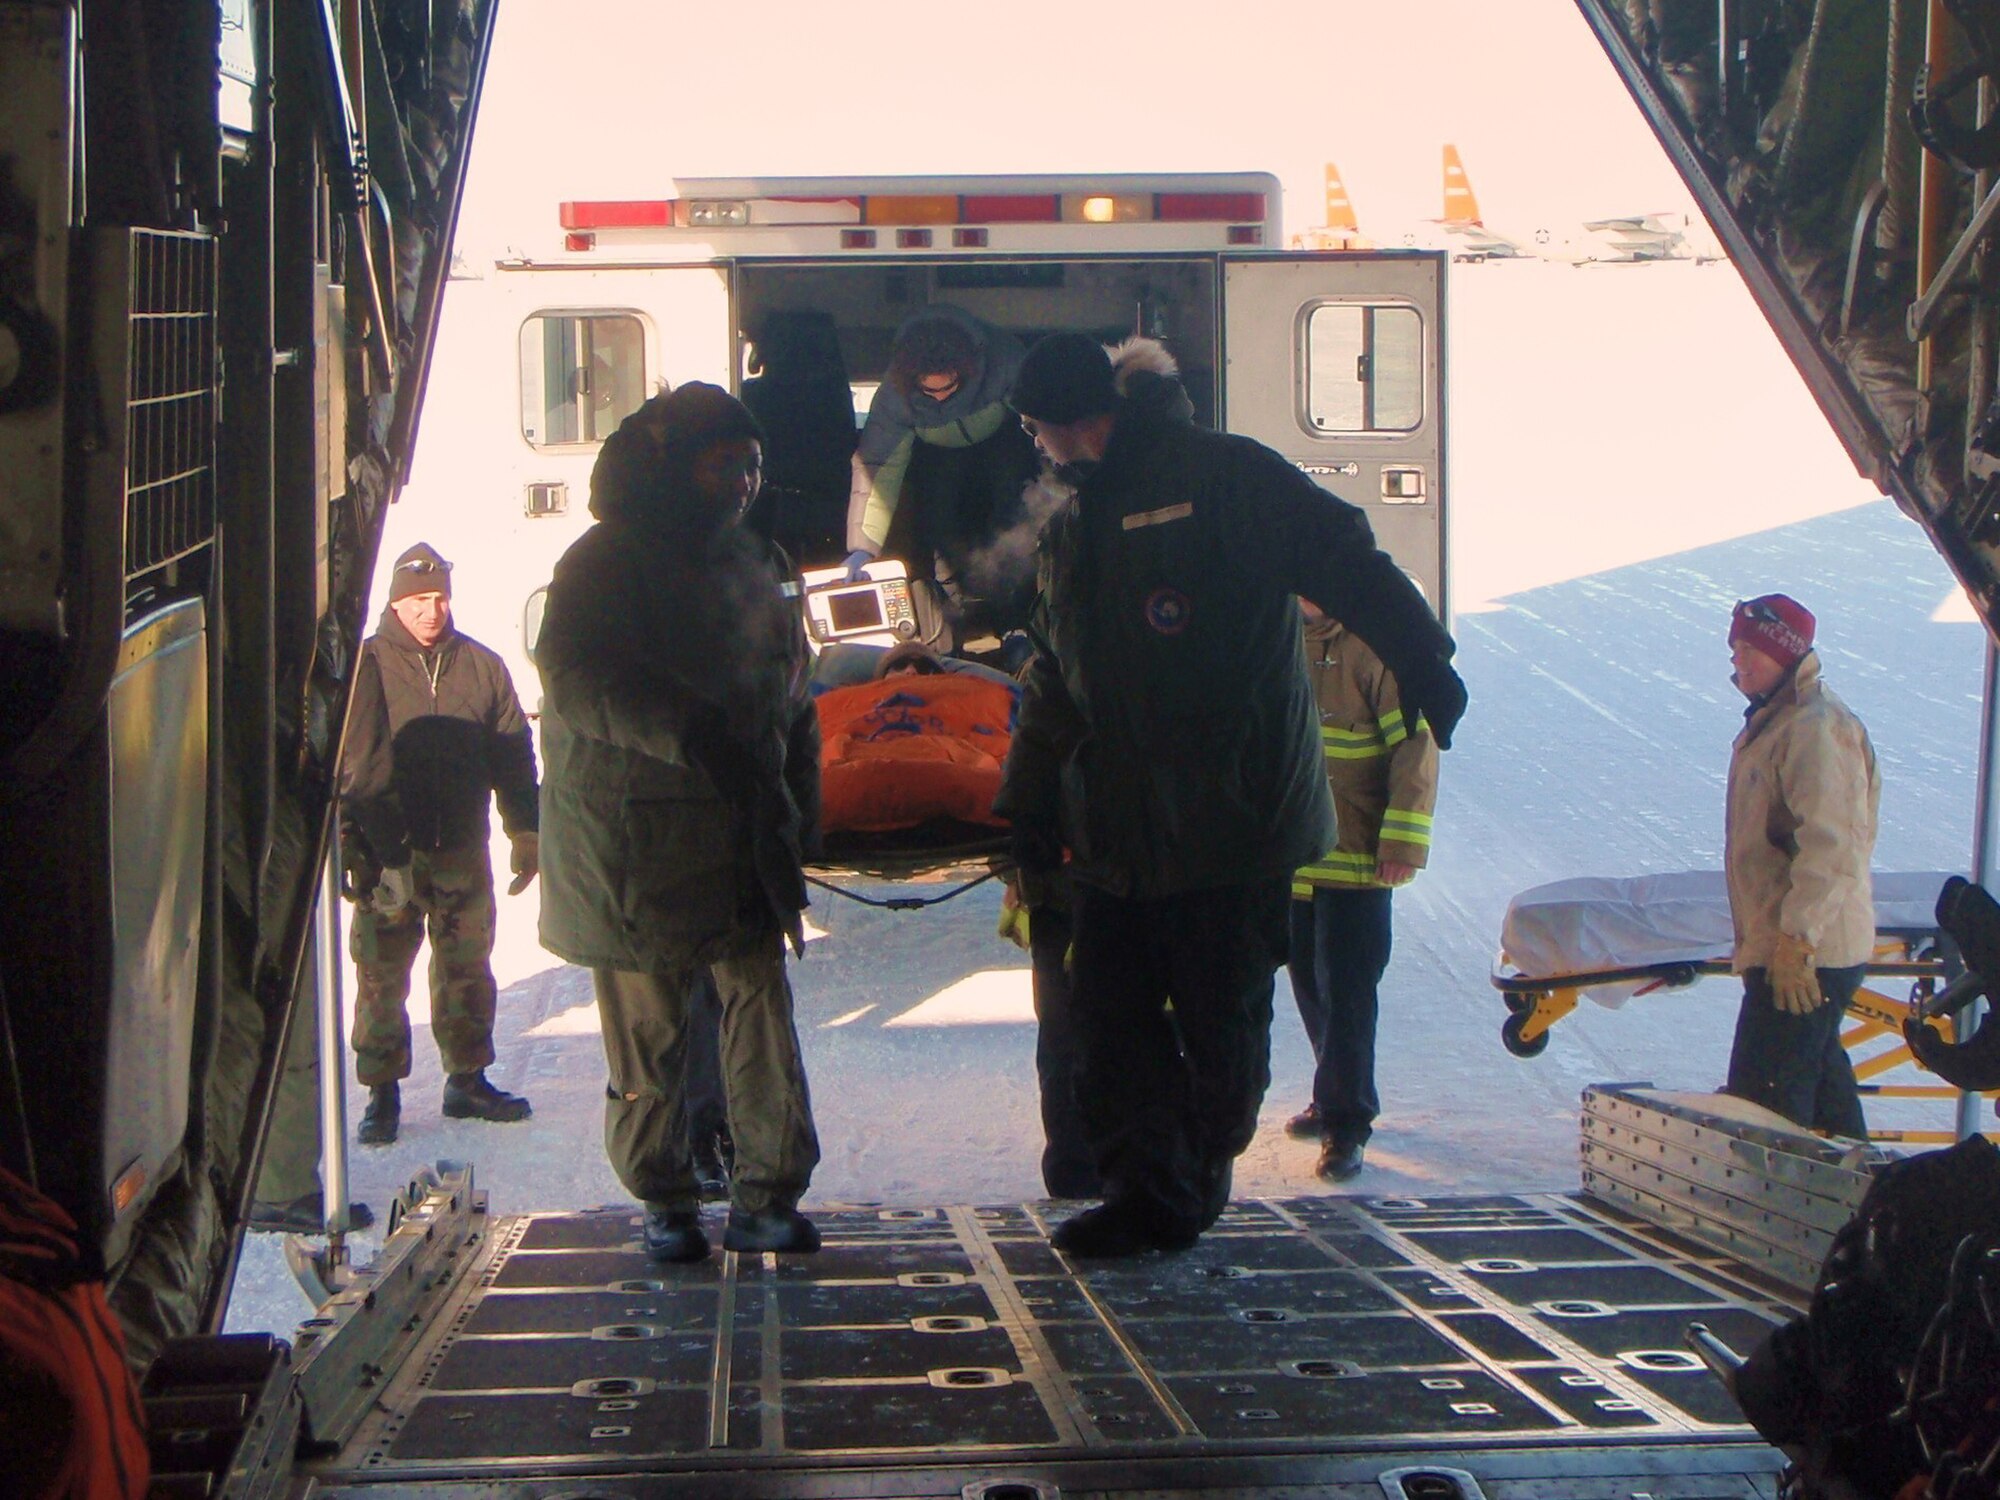 Members of the 18th Aeromedical Evacuation Squadron, Kadena Air Base, Japan, transport an urgent care patient by airlift to New Zealand for medical care. The members conducted medical evacuation missions over a three-month period at McMurdo Station, Antarctica.
(U.S. Air Force courtesy photo)